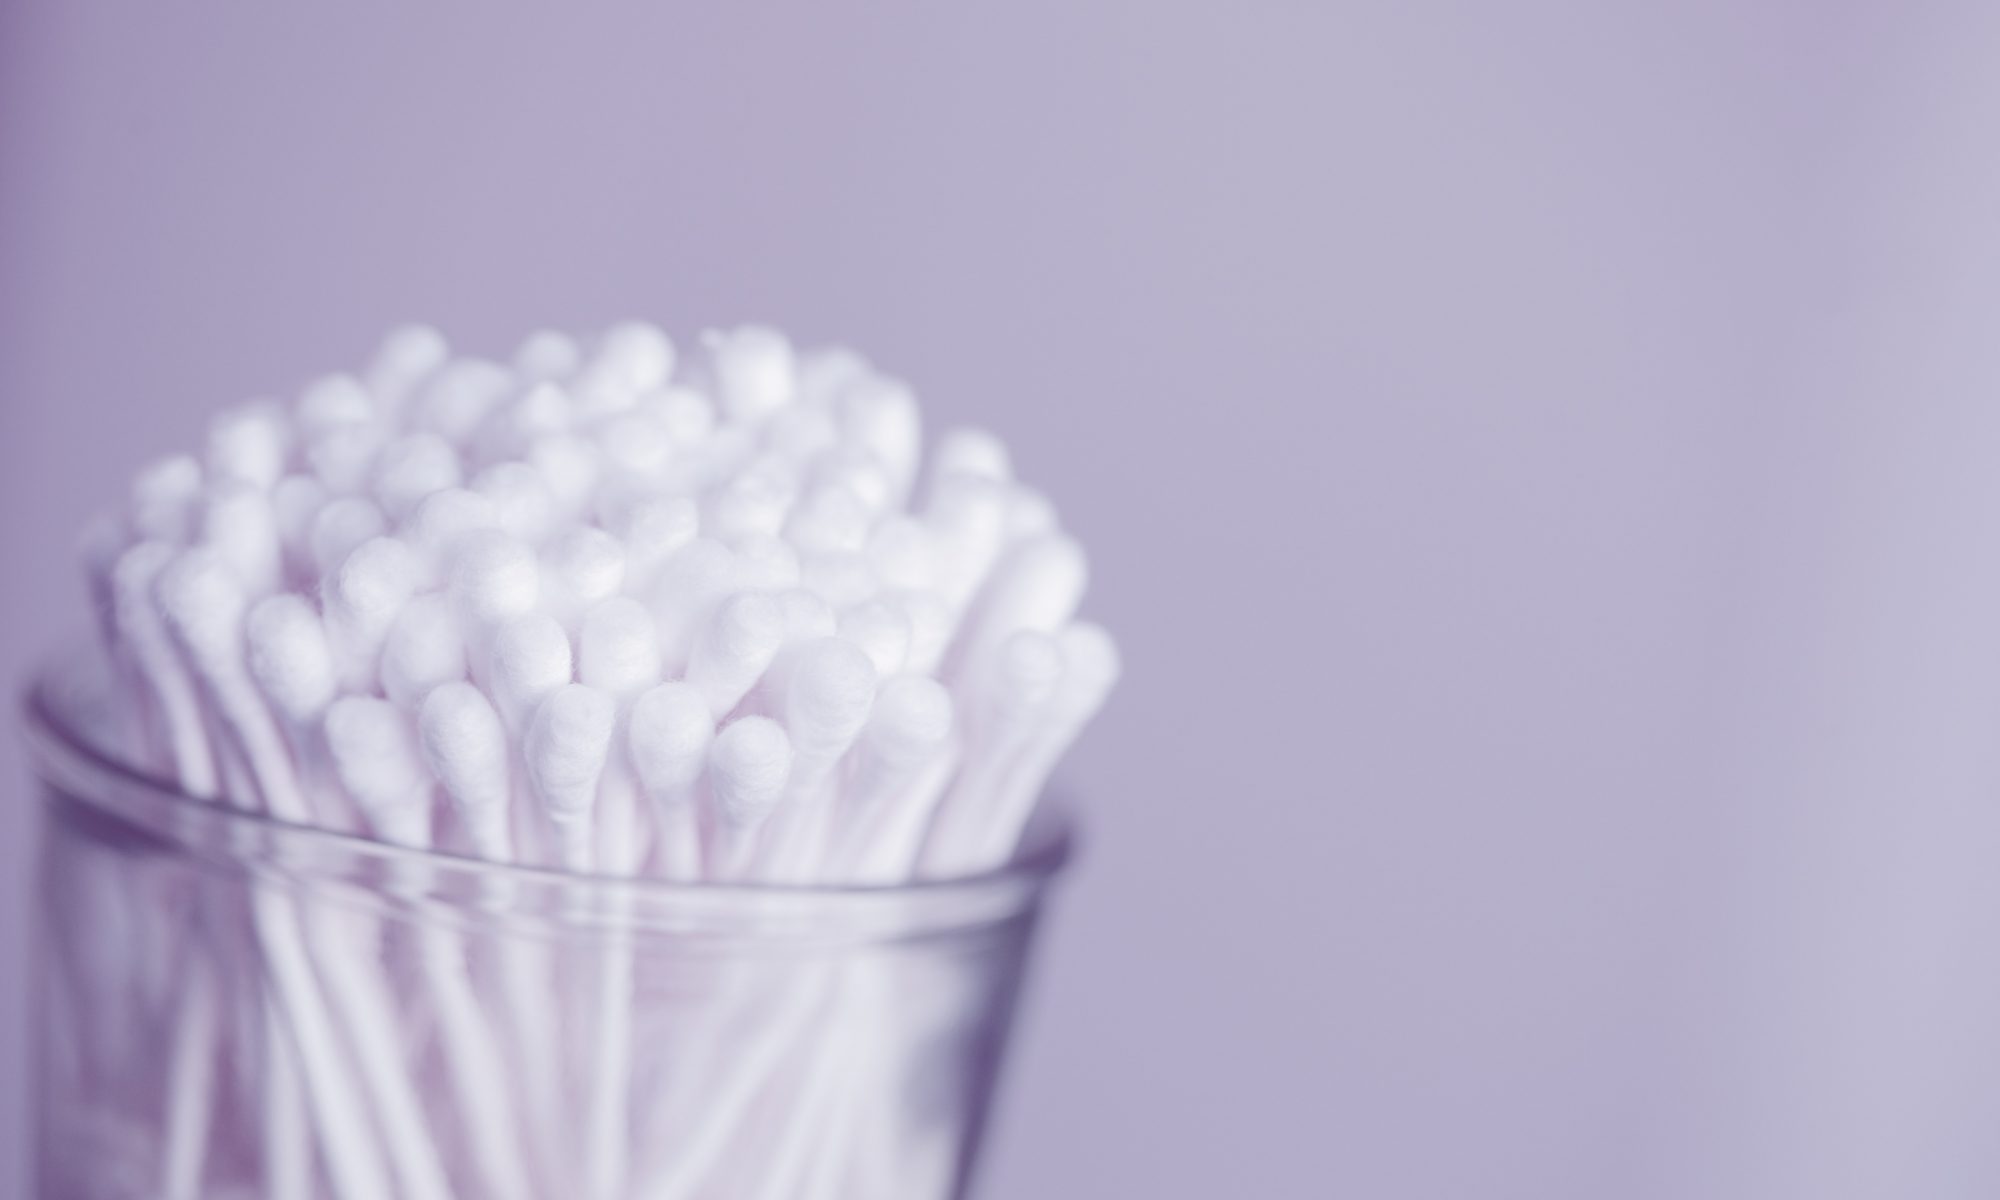 Jar of cotton buds with a lavender background